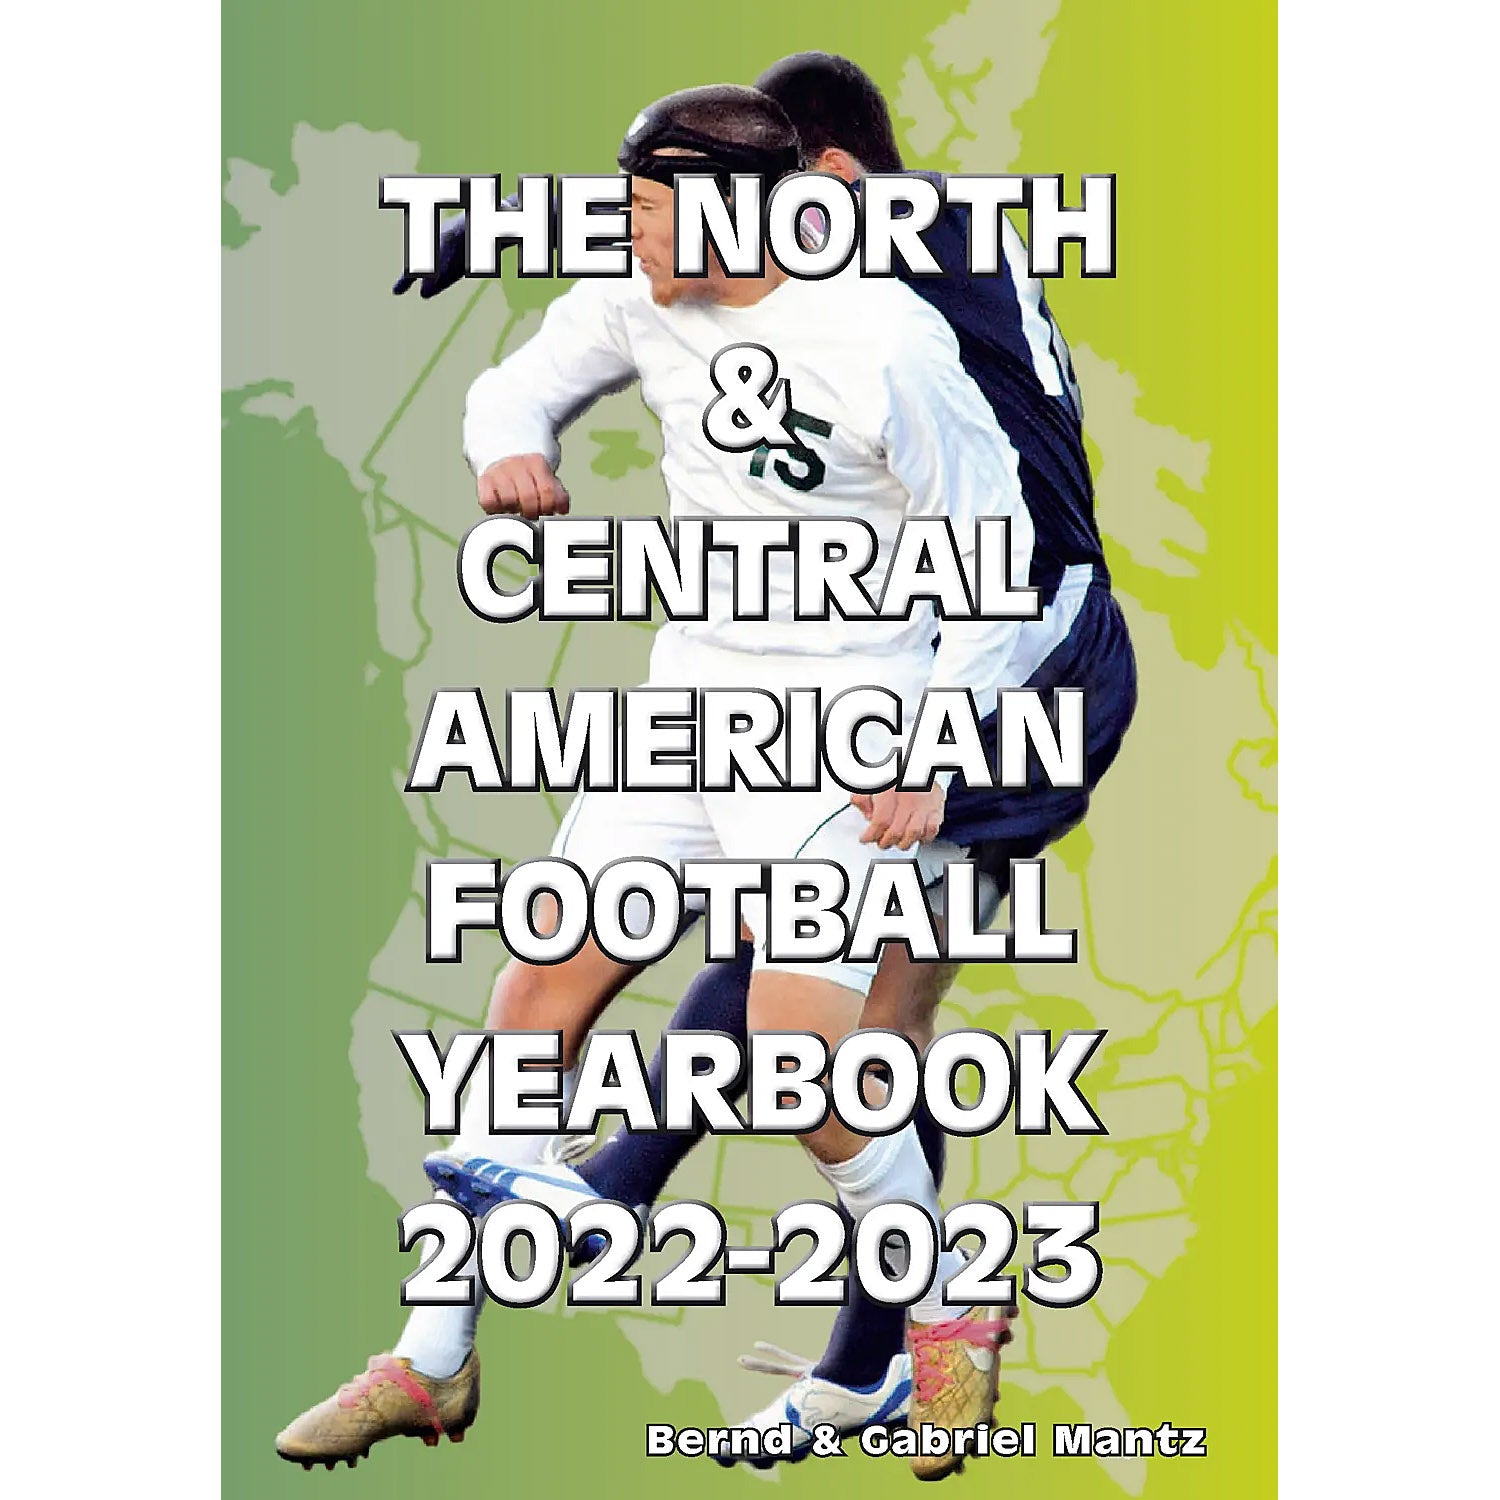 The North & Central American Football Yearbook 2022-2023